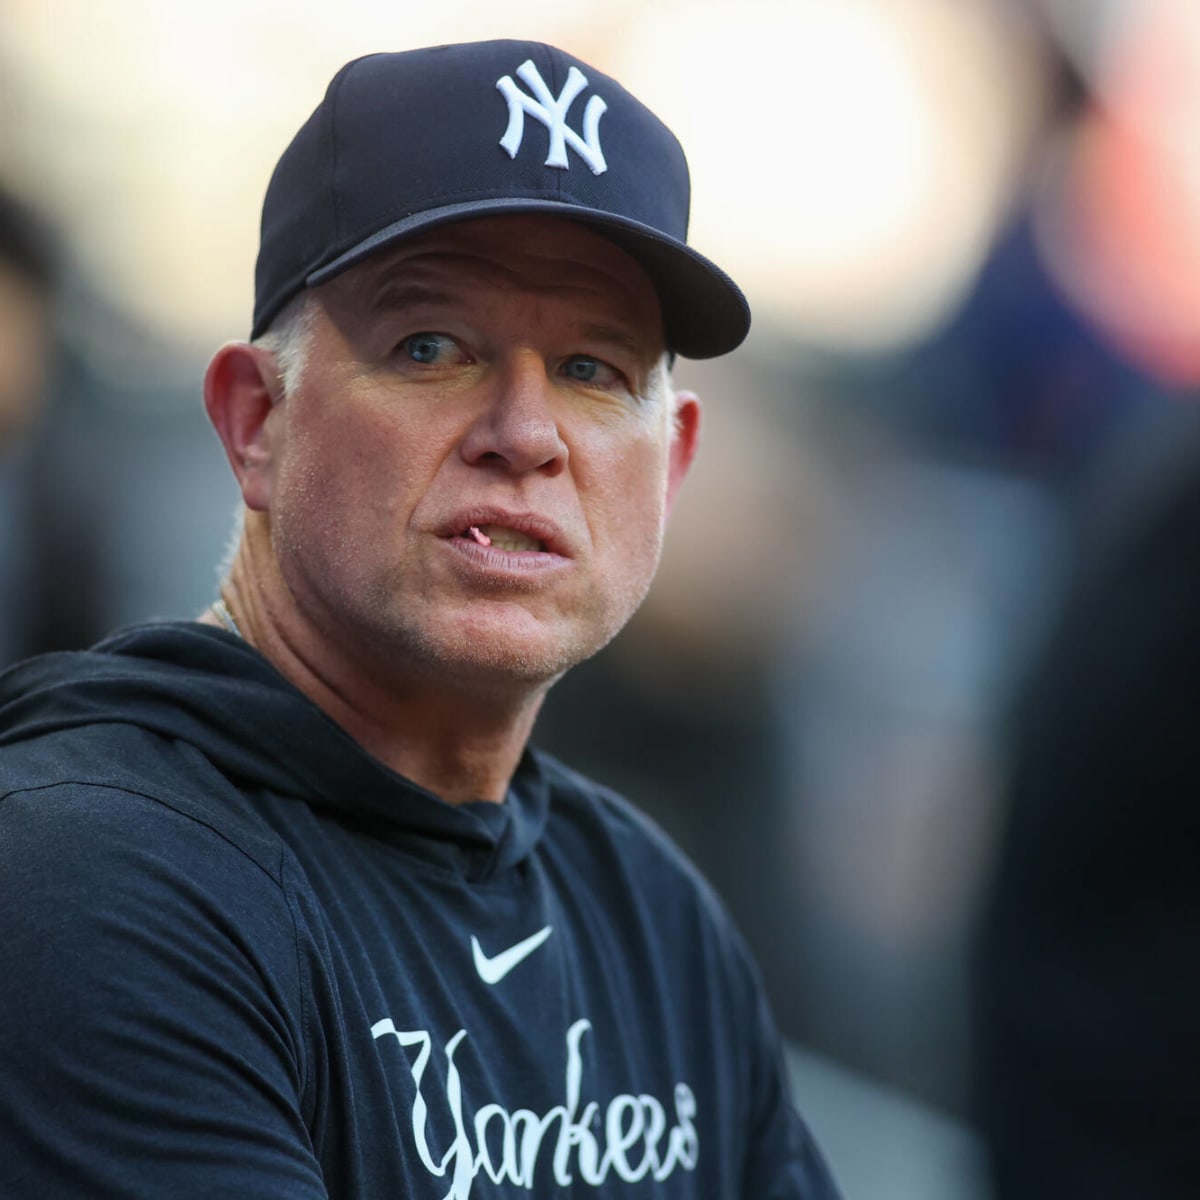 Yankees hire 3-time All-Star as next hitting coach after stunning